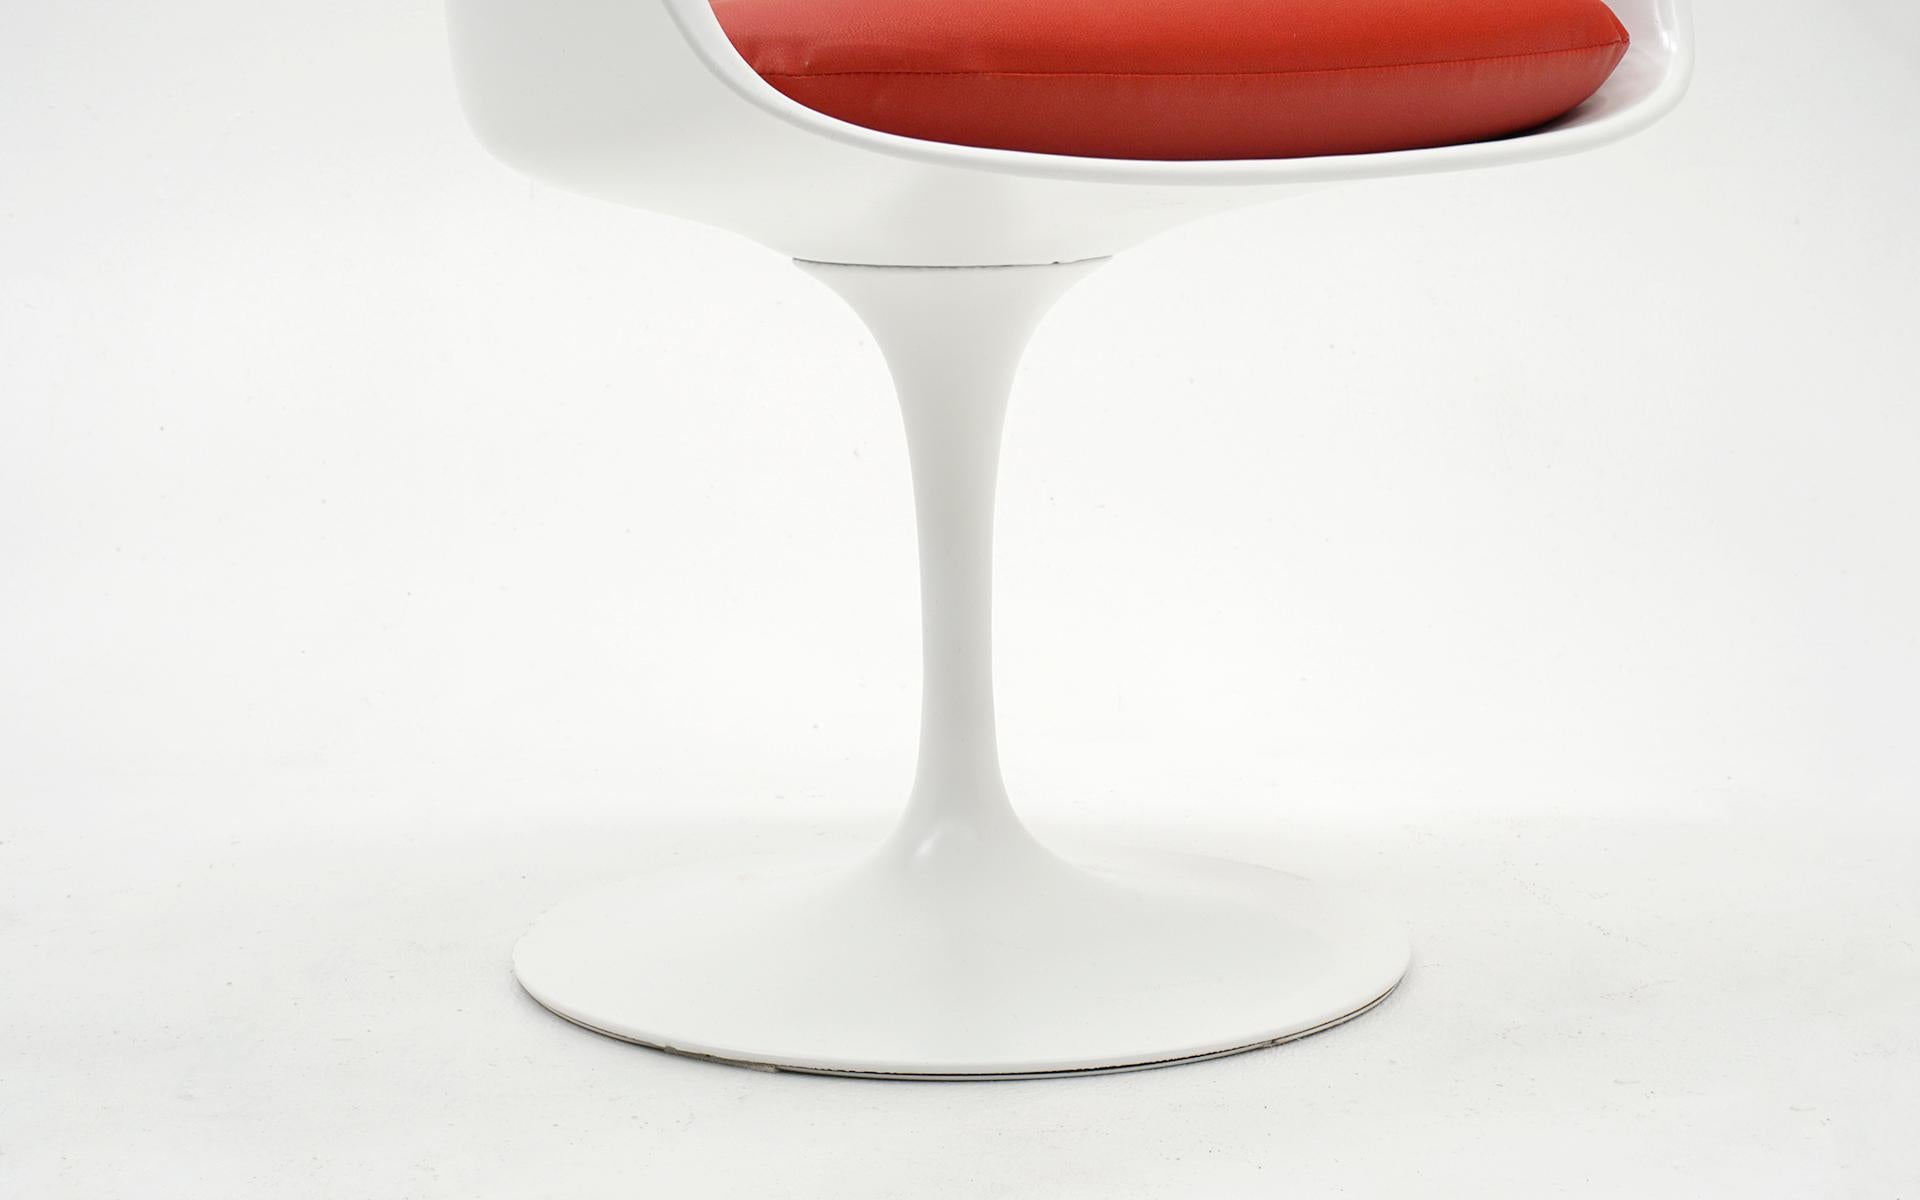 Mid-Century Modern Eero Saarinen for Knoll Tulip Swivel Chair with Arms, White, Red, Excellent 